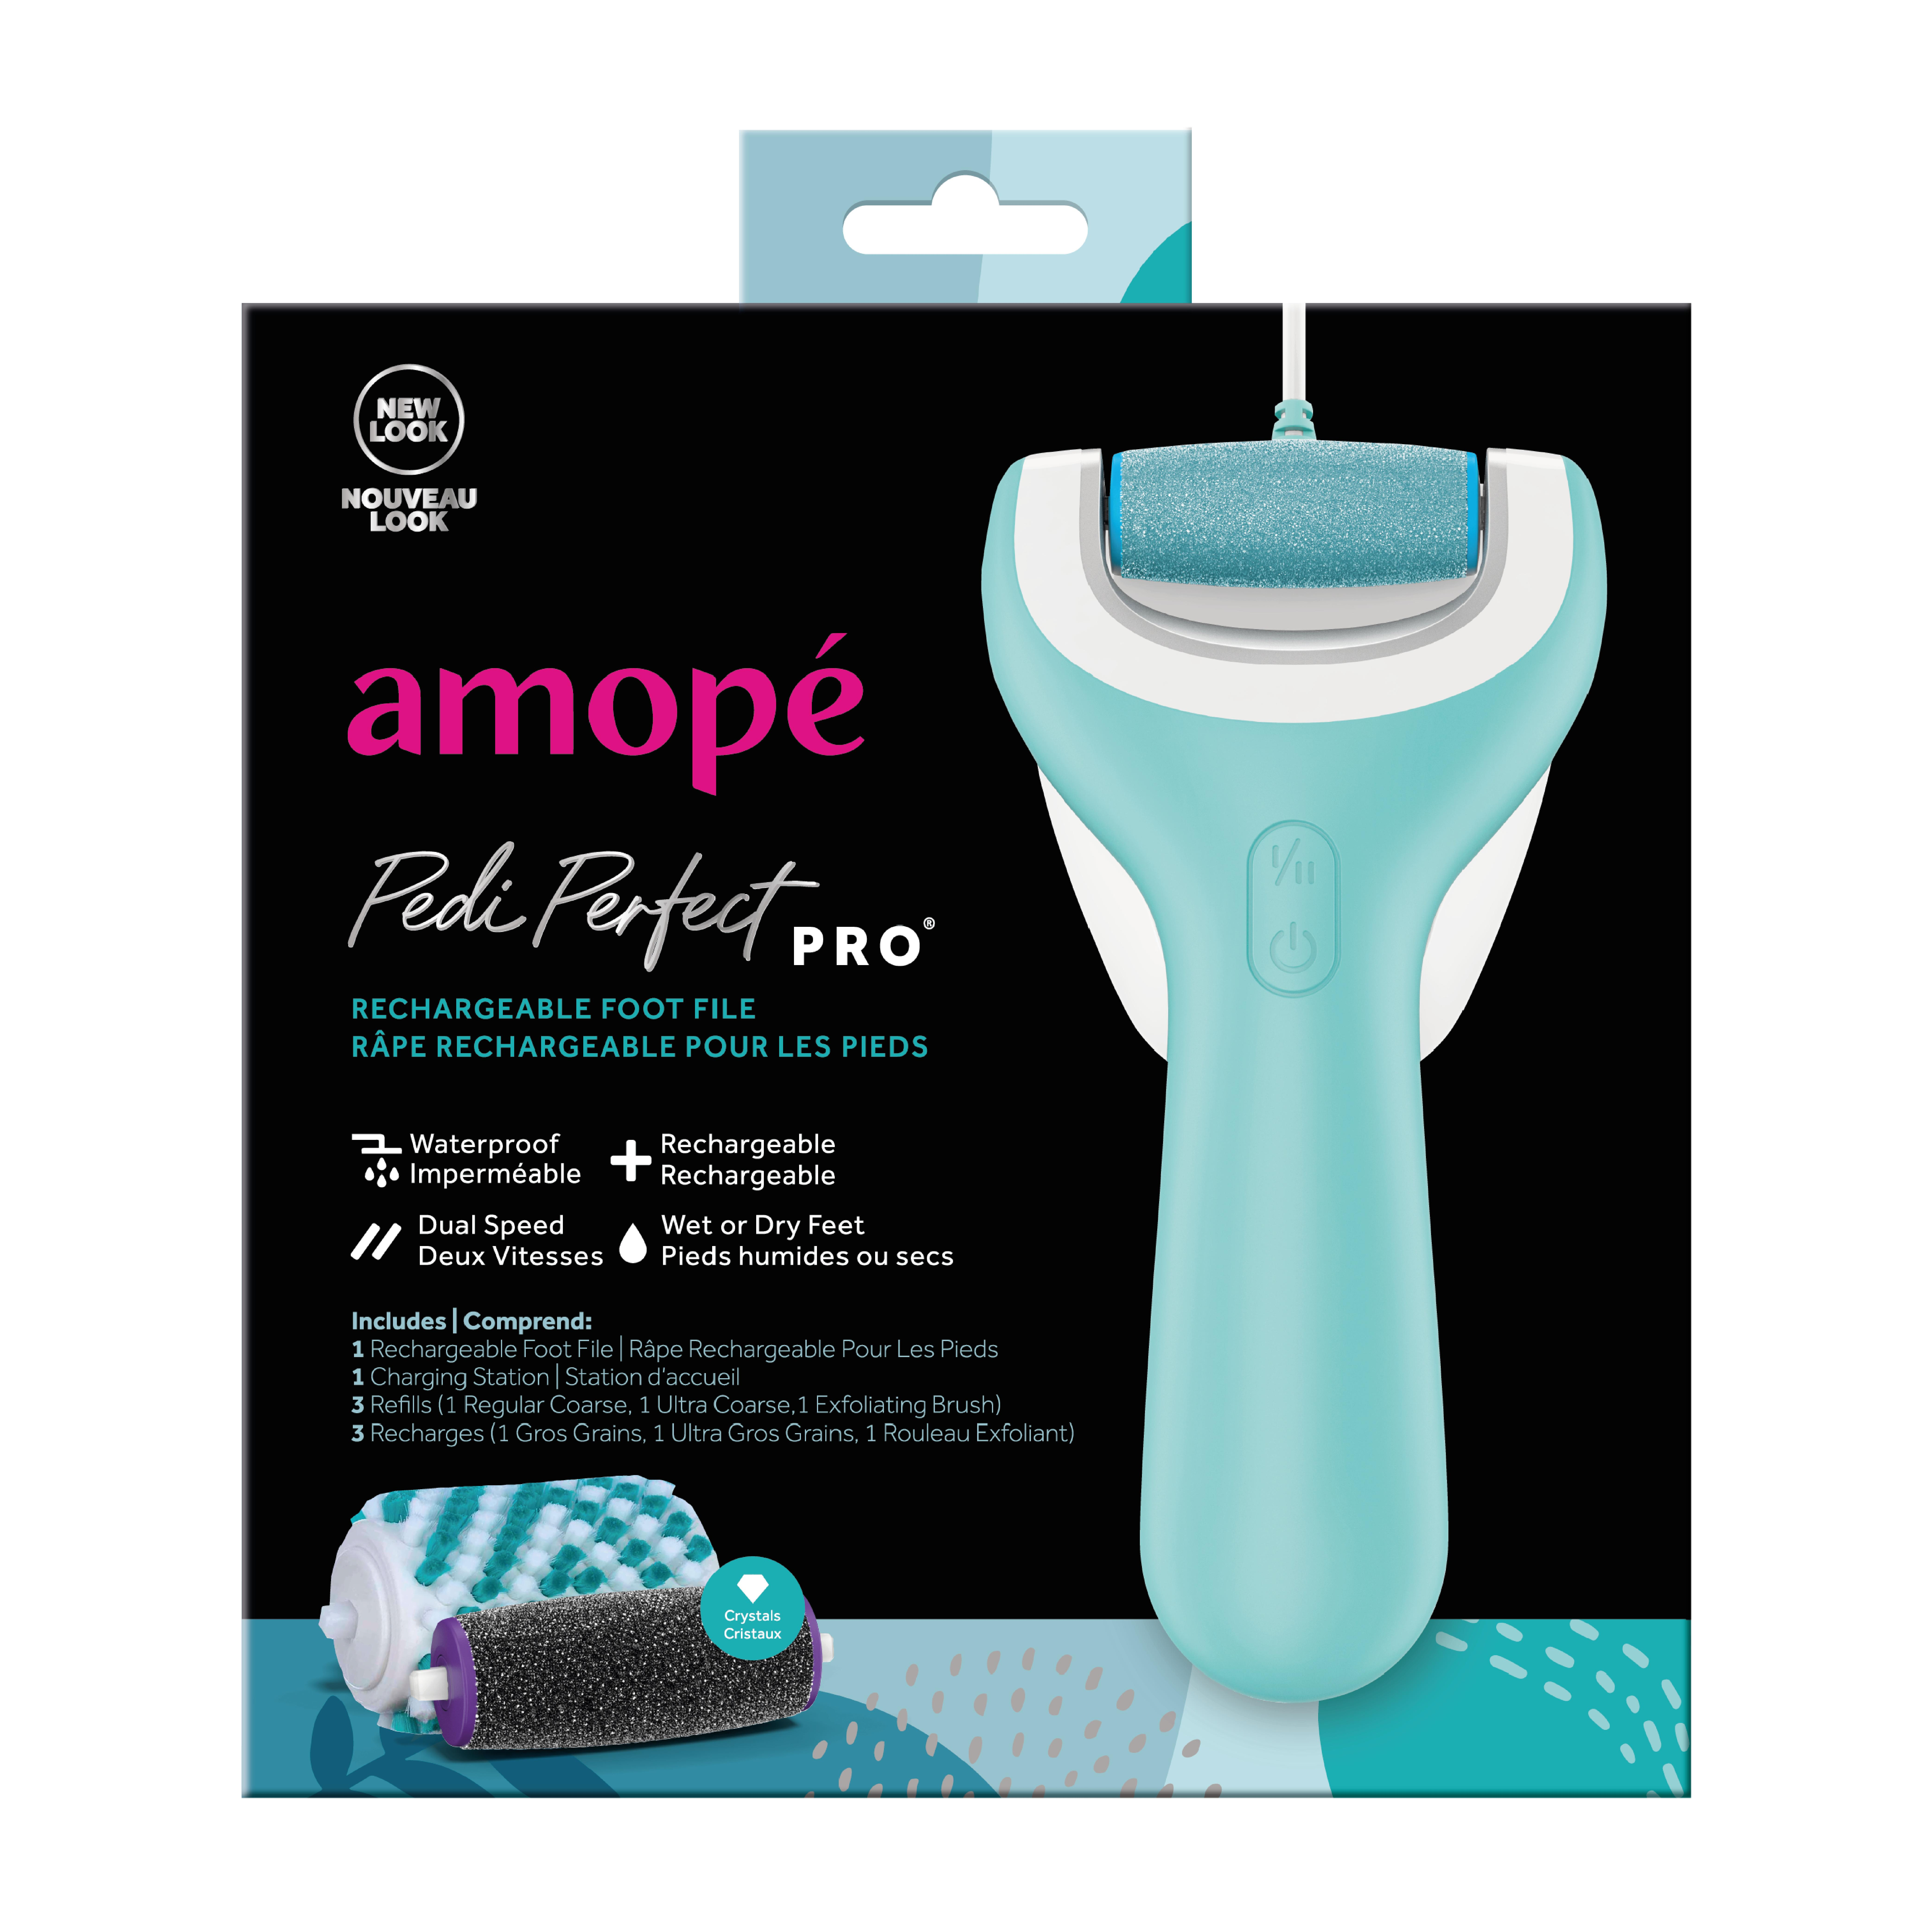 AMOPE Pedi Perfect Electronic Foot File Pickup in Albany ny - general for  sale - by owner - craigslist